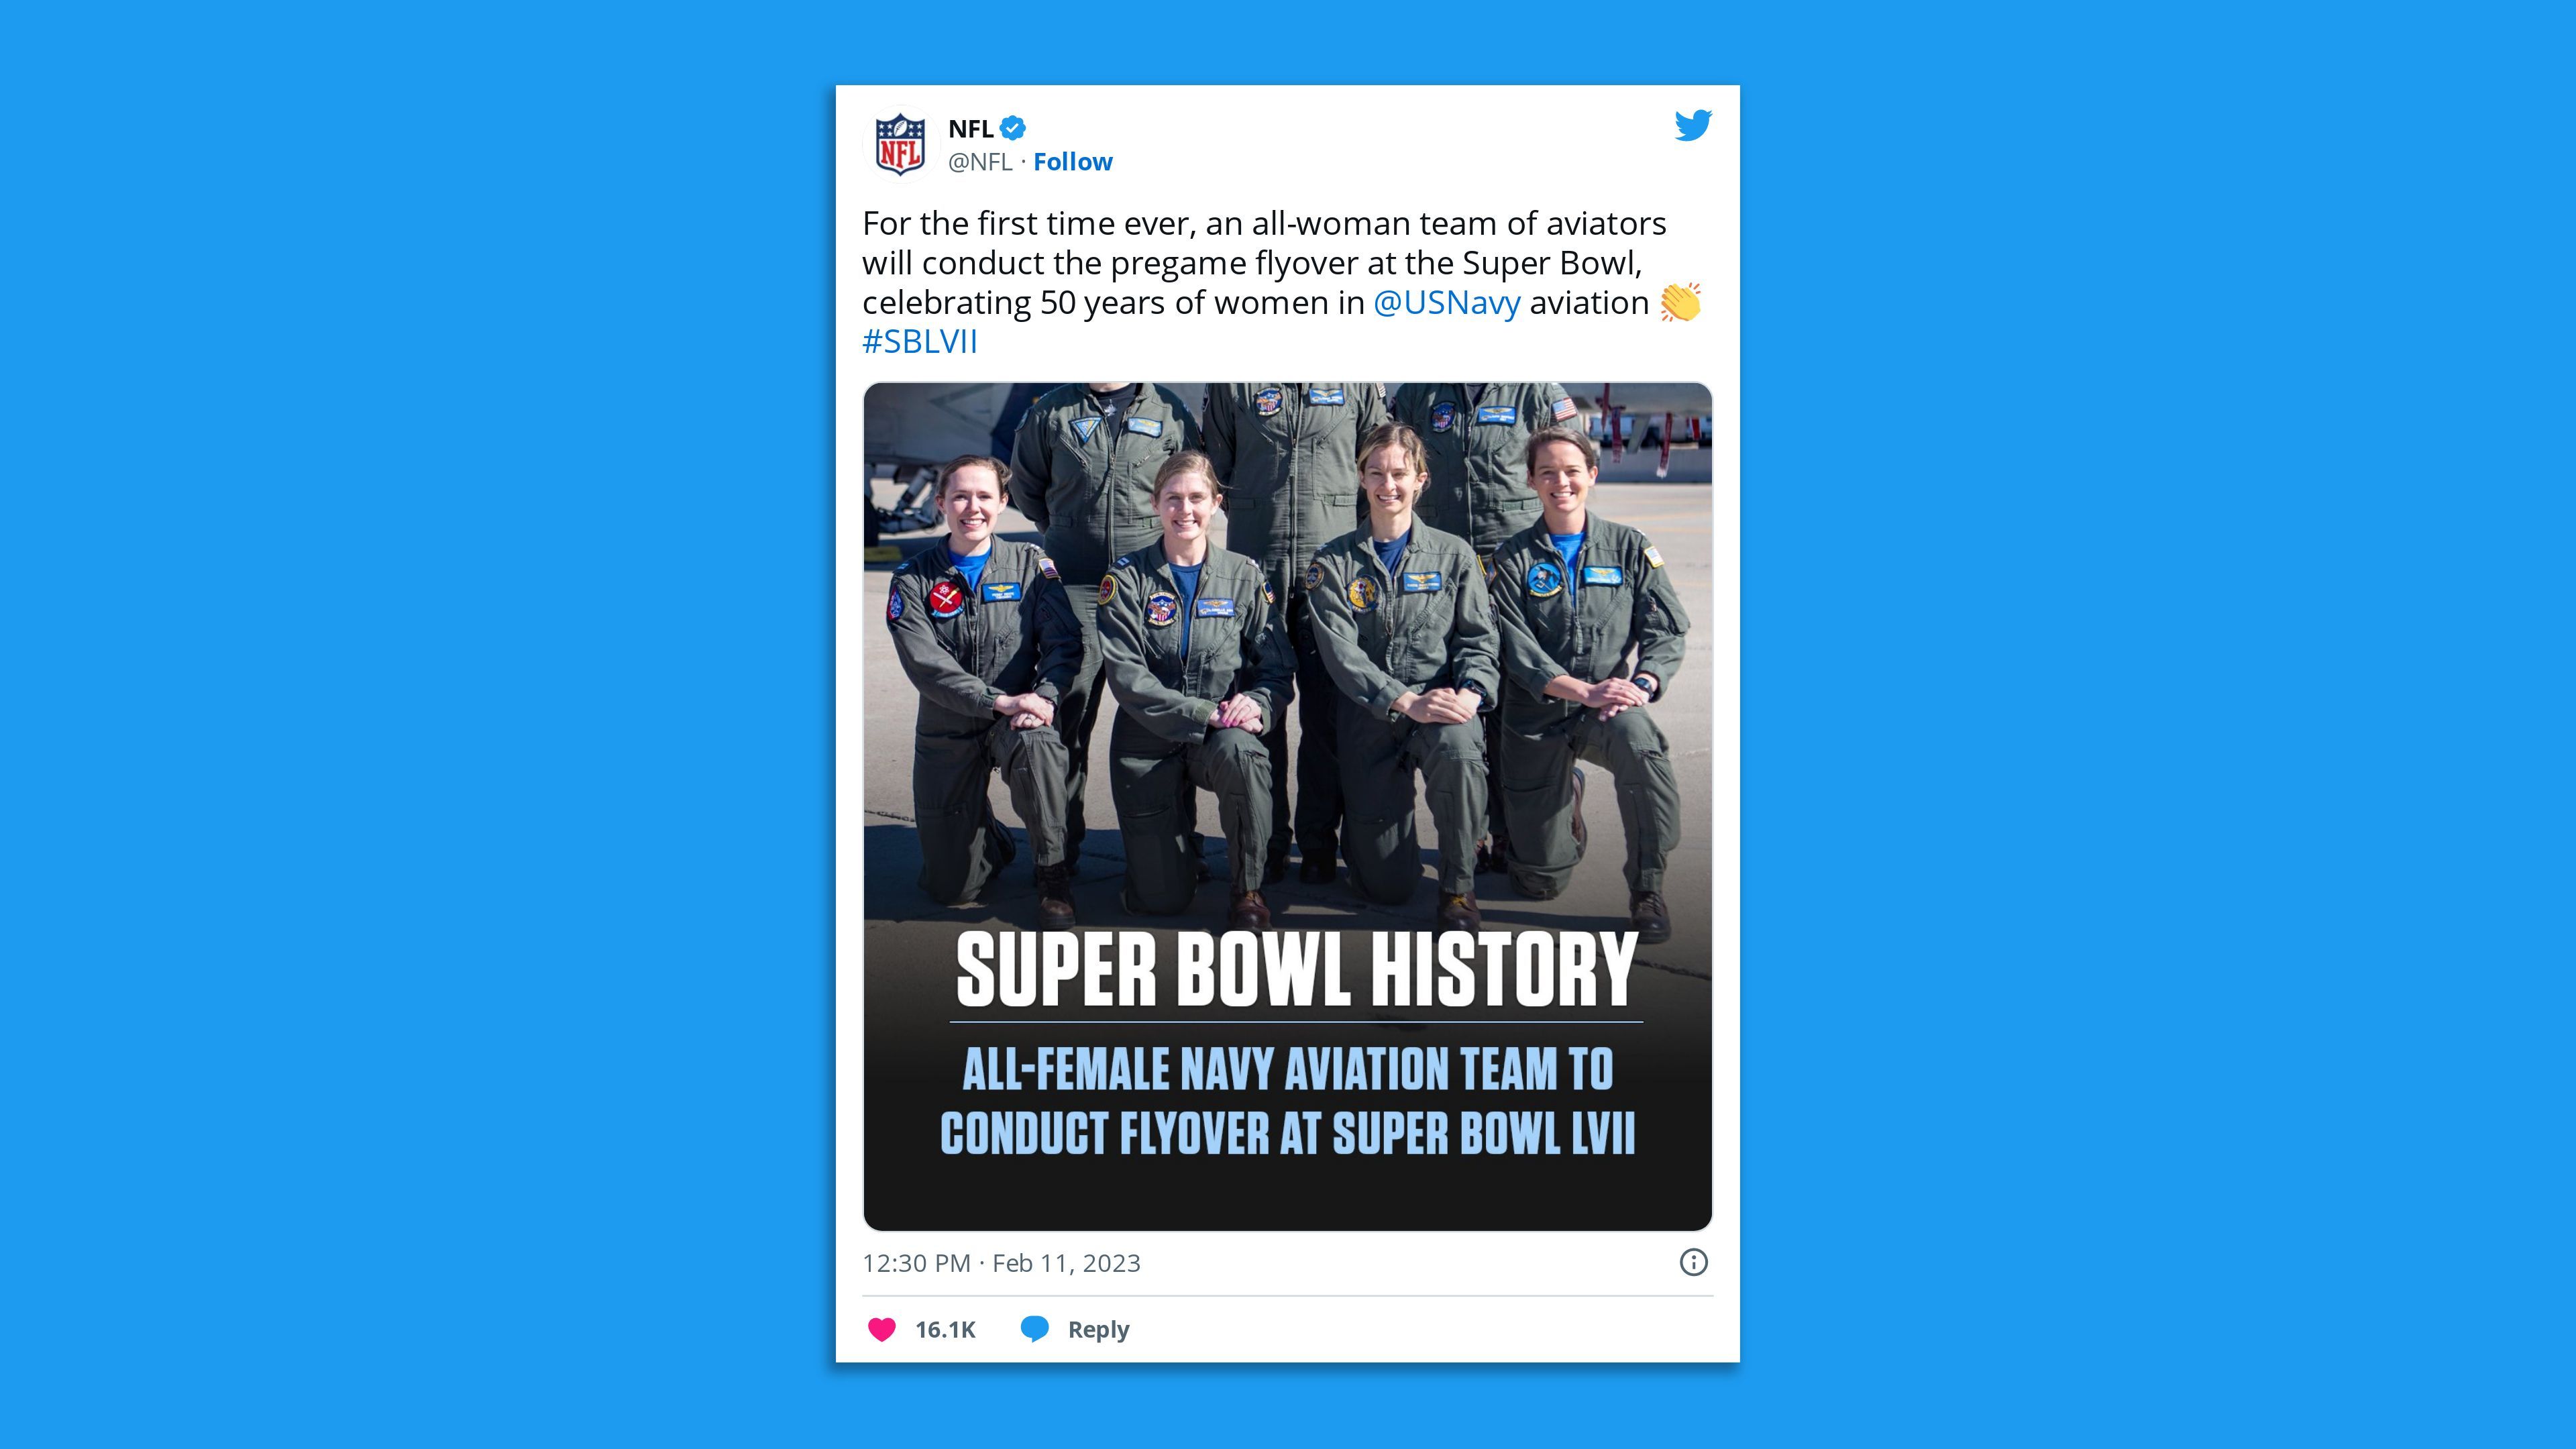 A screenshot of an NFL tweet on the U.S. Navy all-women team of pilots noting for "the first time ever, an all-woman team of aviators will conduct the pregame flyover at the Super Bowl."